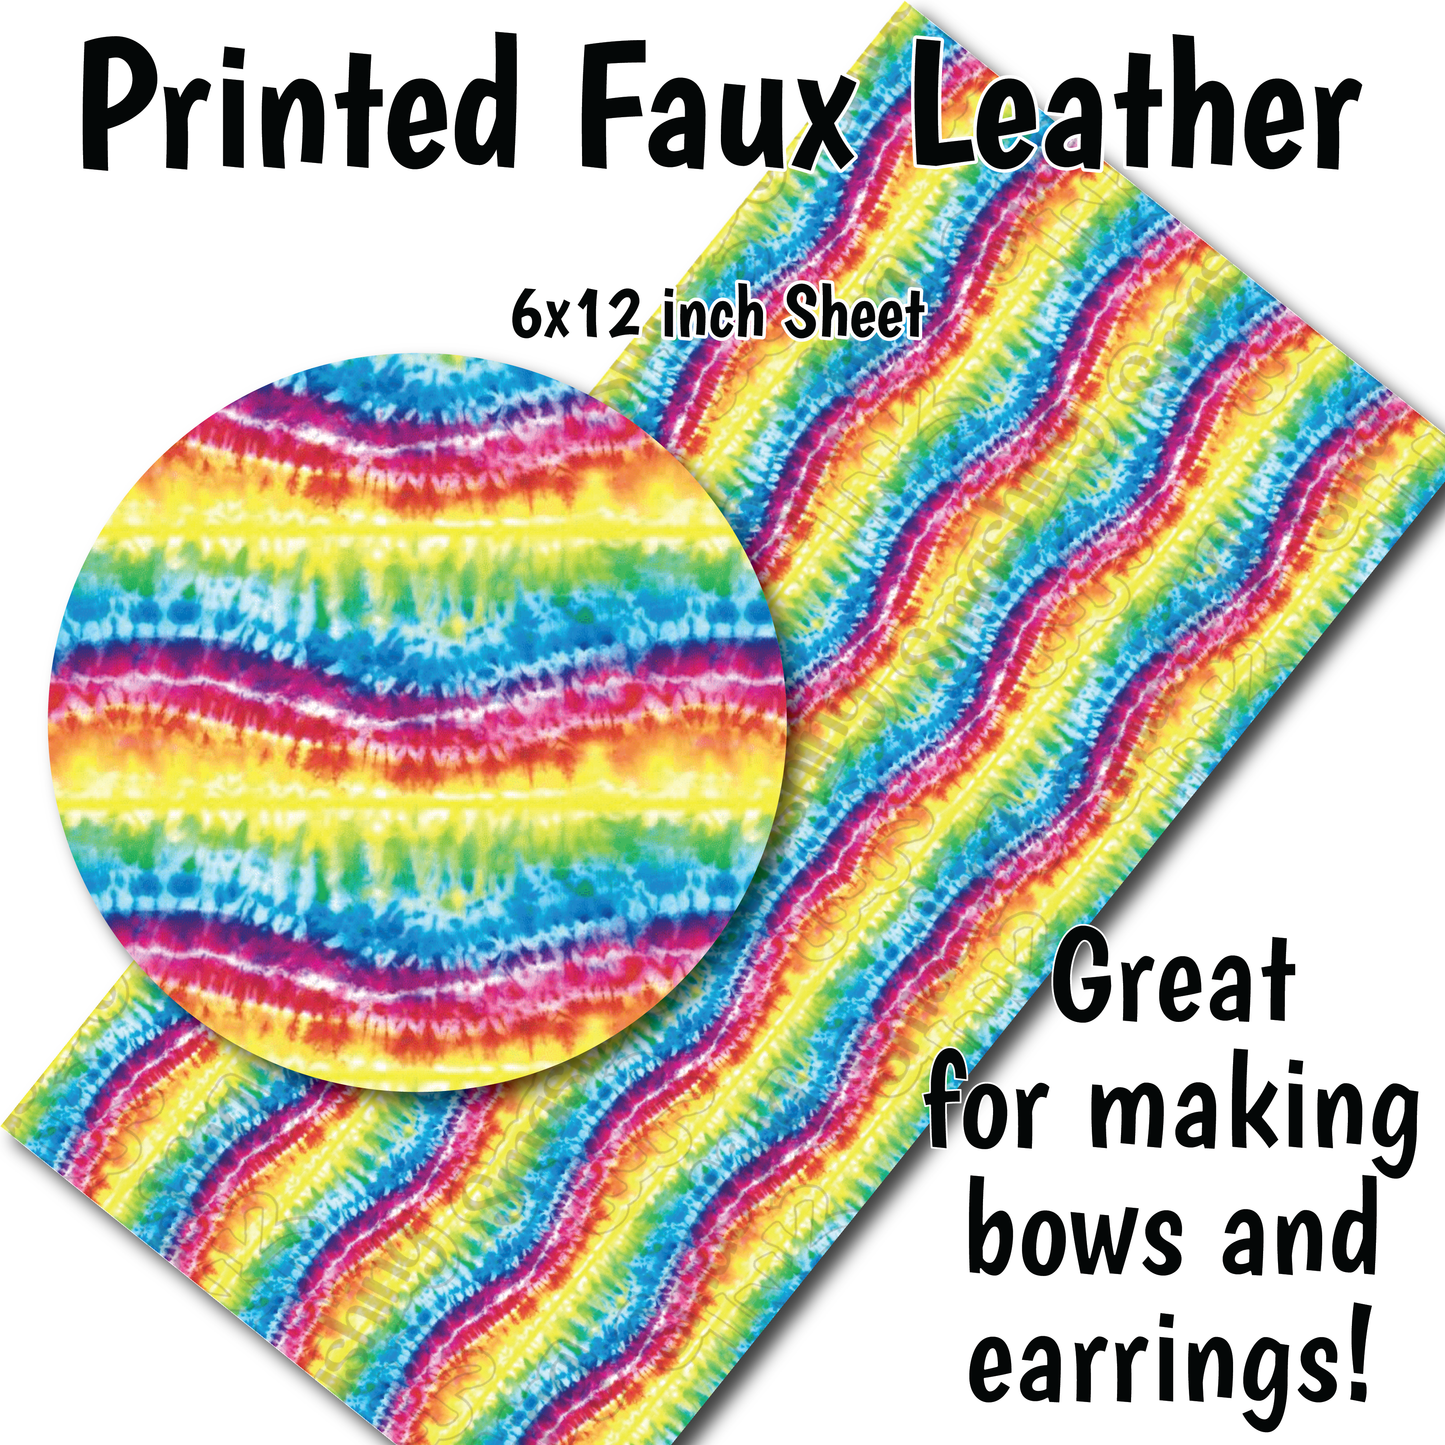 Colorful Tie Dye- Faux Leather Sheet (SHIPS IN 3 BUS DAYS)